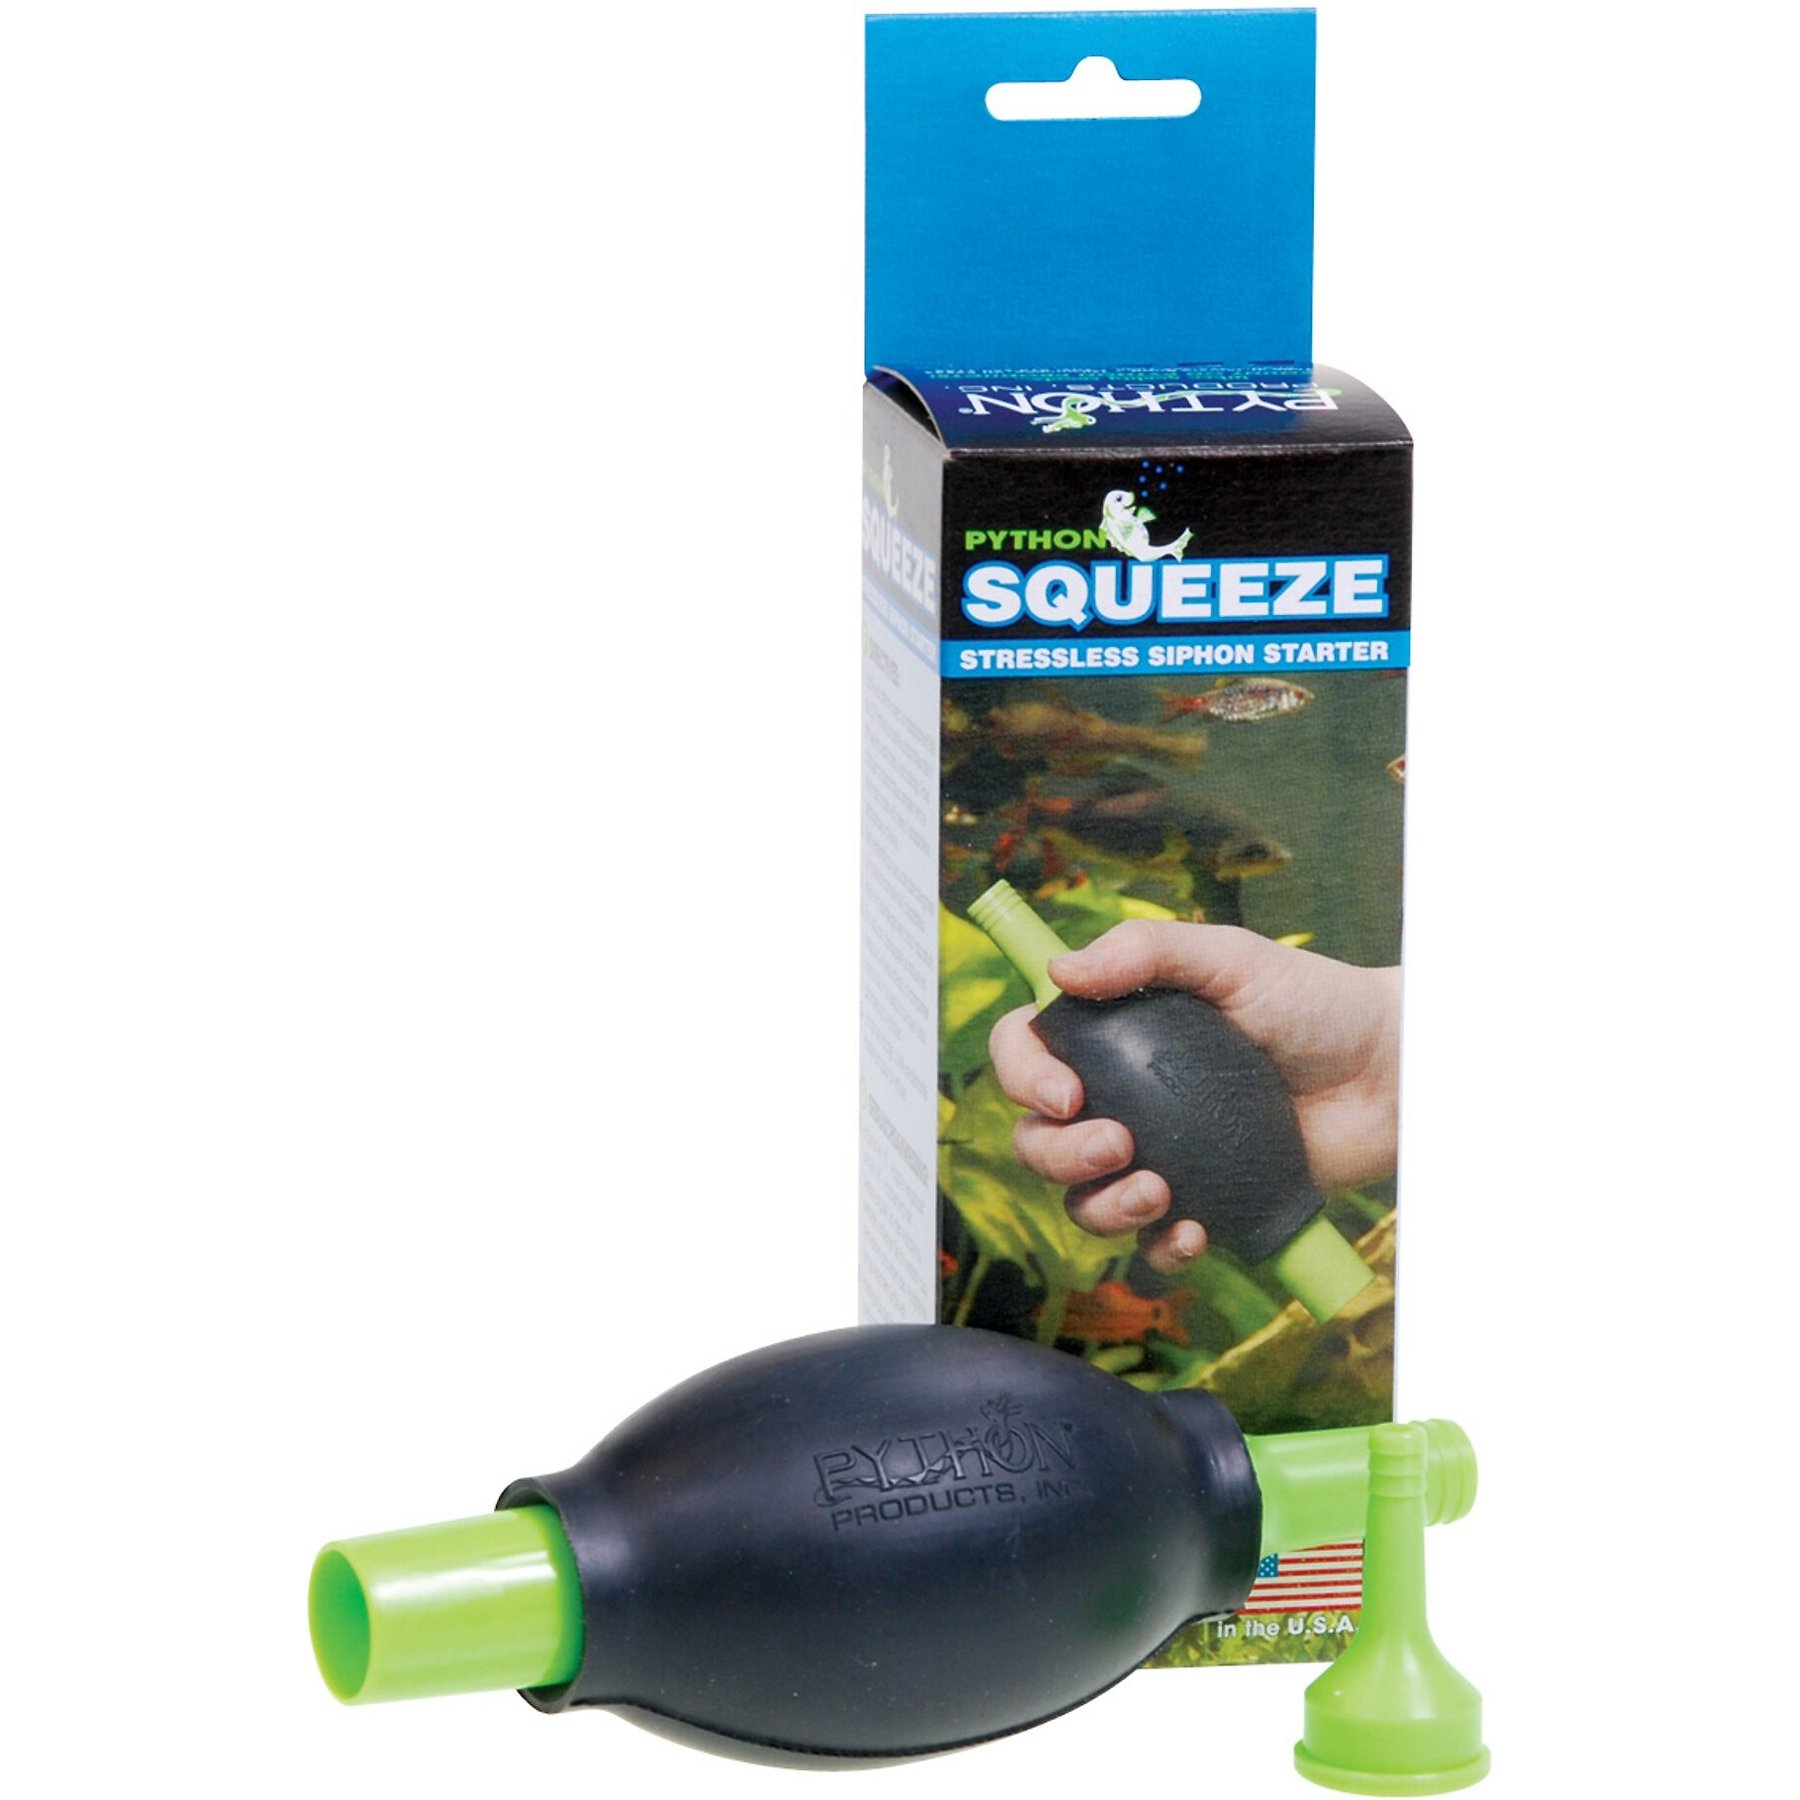 PYTHON Squeeze Stressless Siphon Starter for Aquariums - Chewy